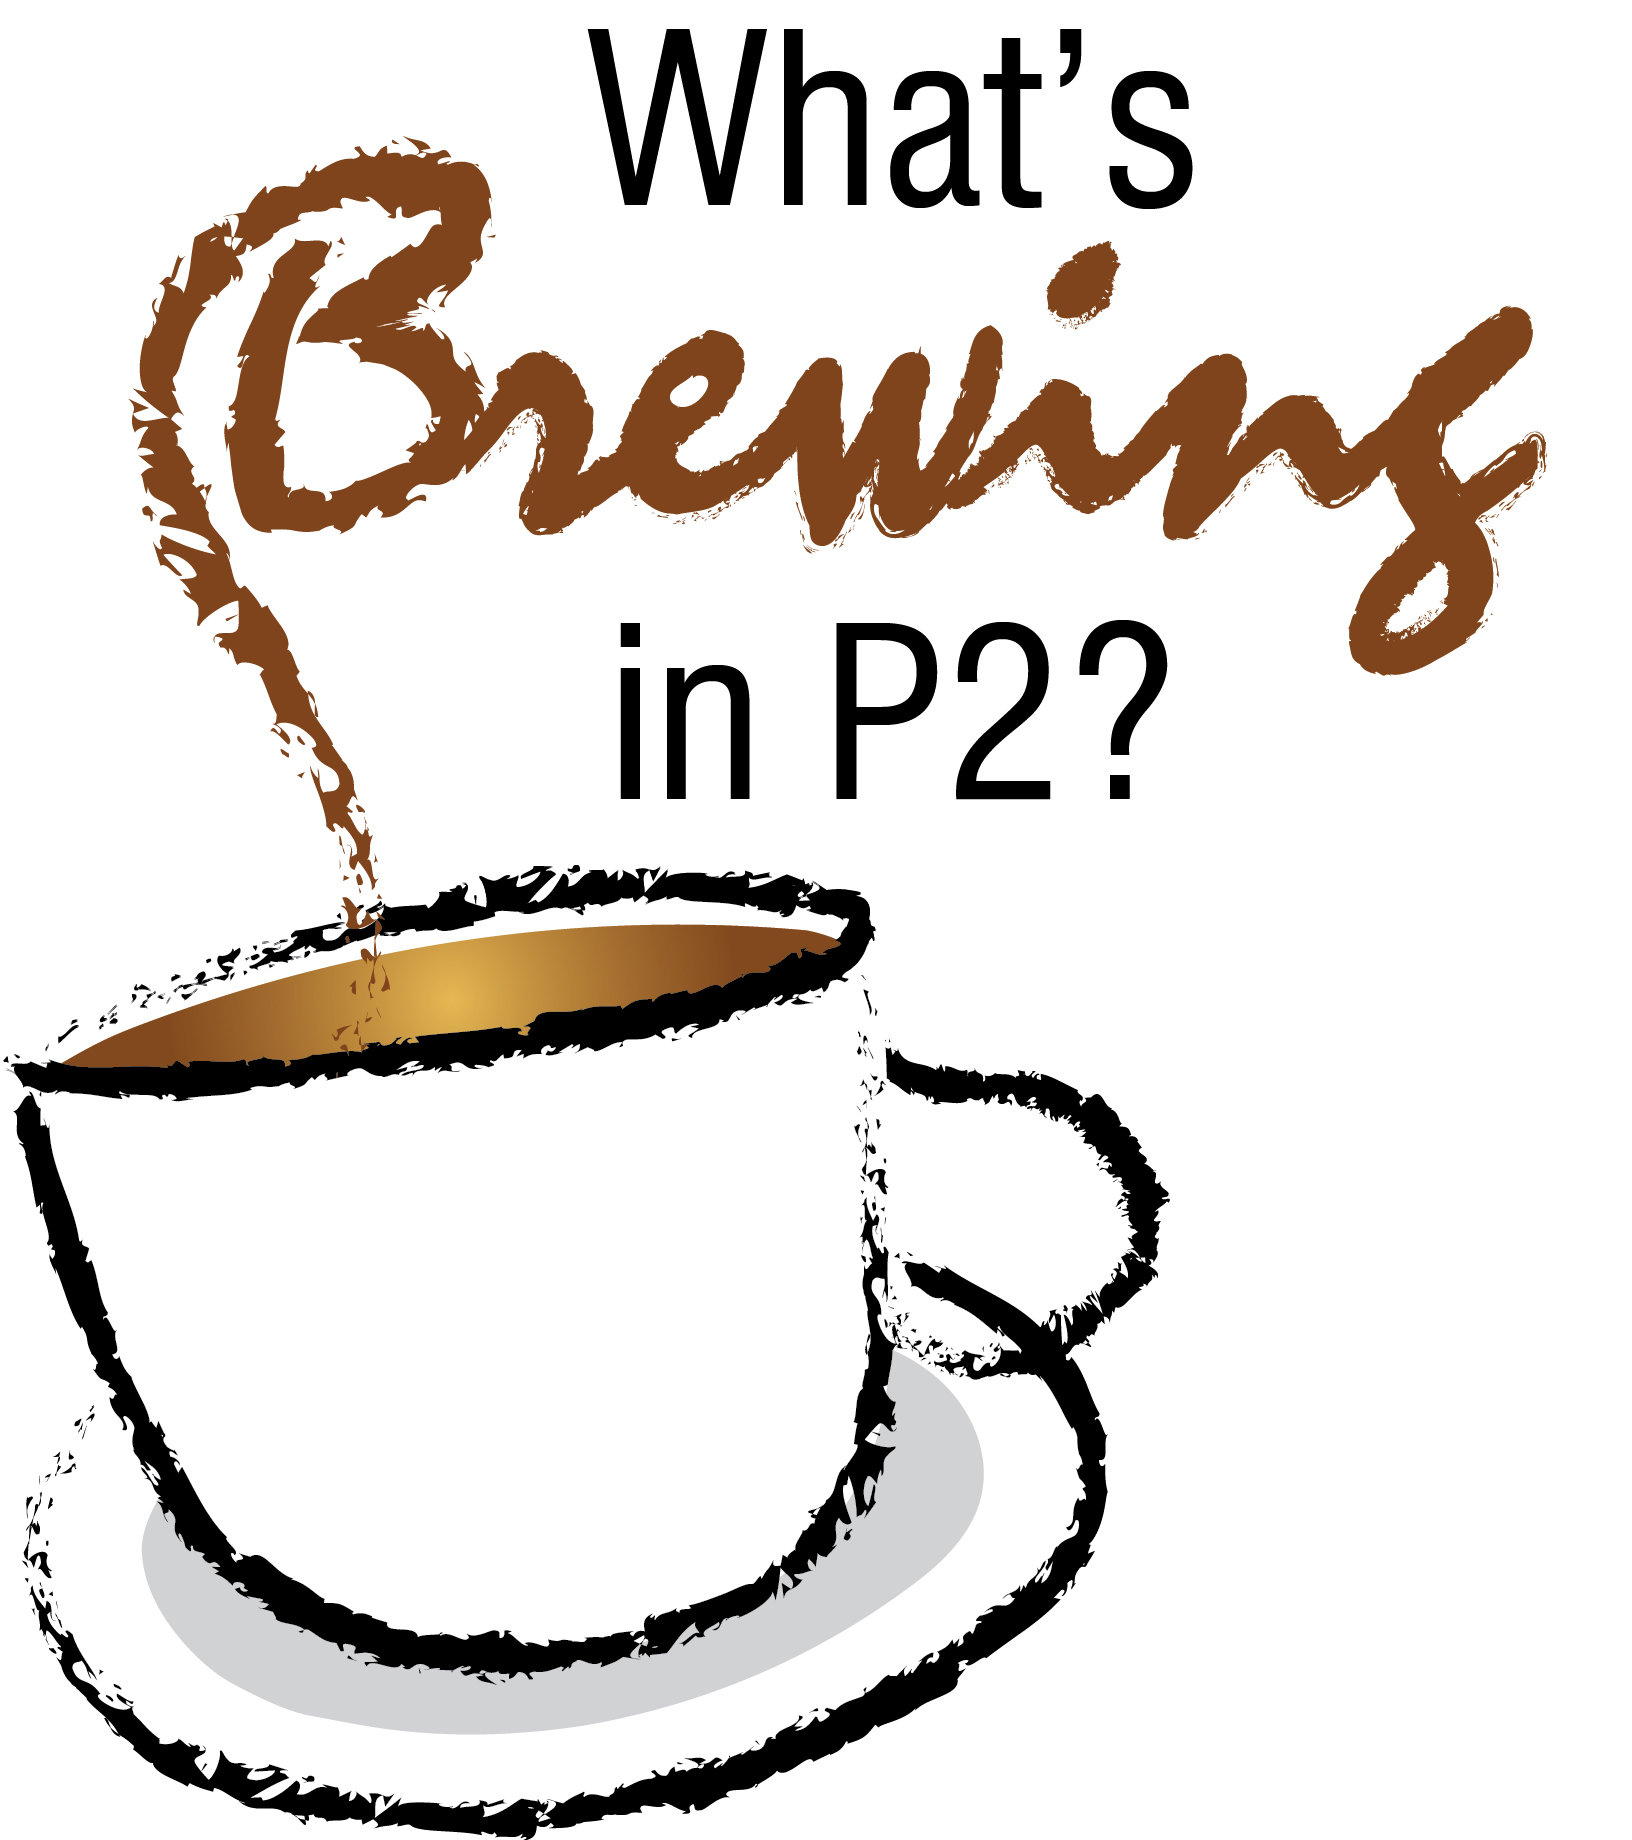 What's Brewing in P2